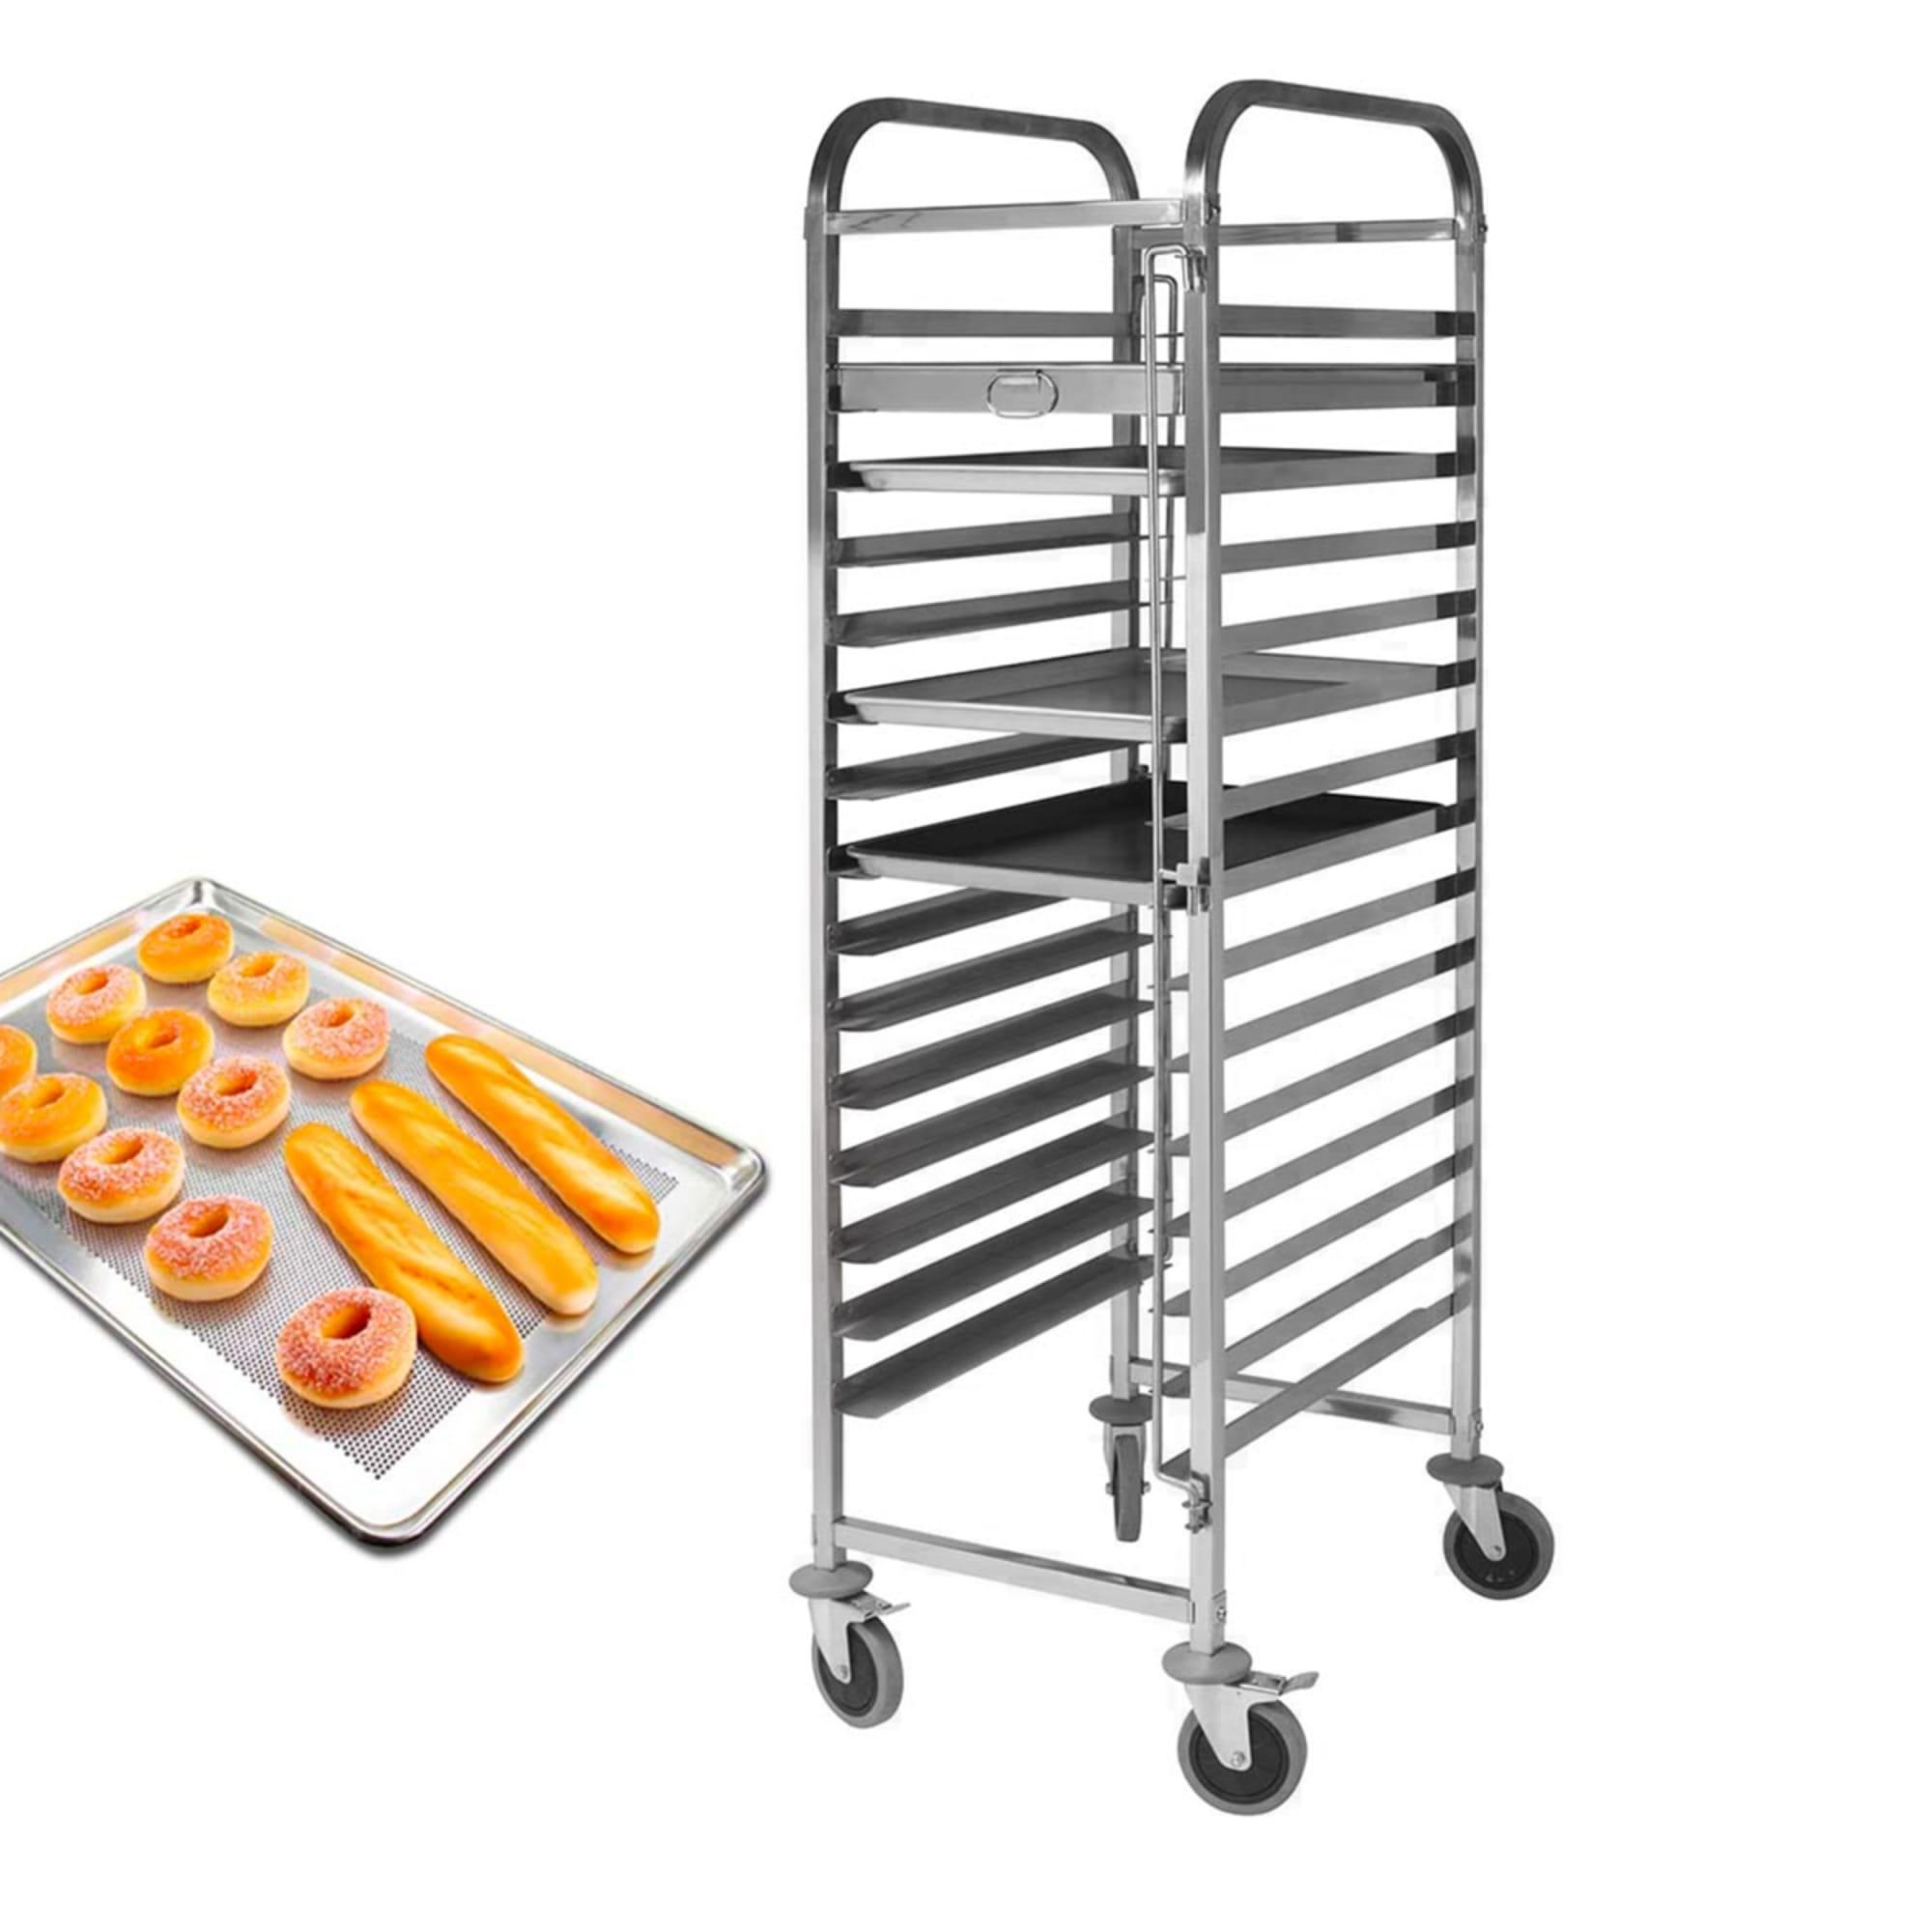 Soga Stainless Steel Gastronorm Trolley 15 Tier Suits 60x40cm Trays Set of 2 Image 3